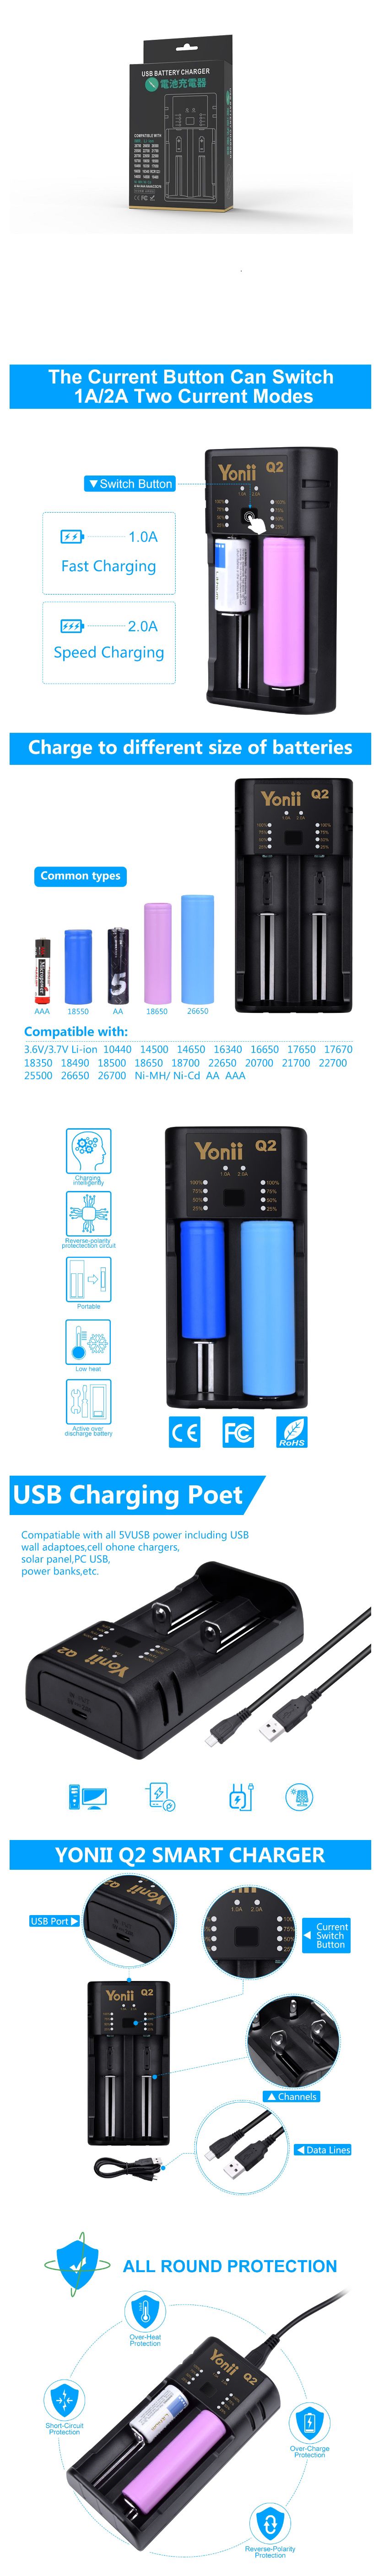 Yonii-Q2-Double-Slot-USB-Rechargeable-Lithium-Battery-Charger-Multi-functional-Intelligent-Charger-f-1551827